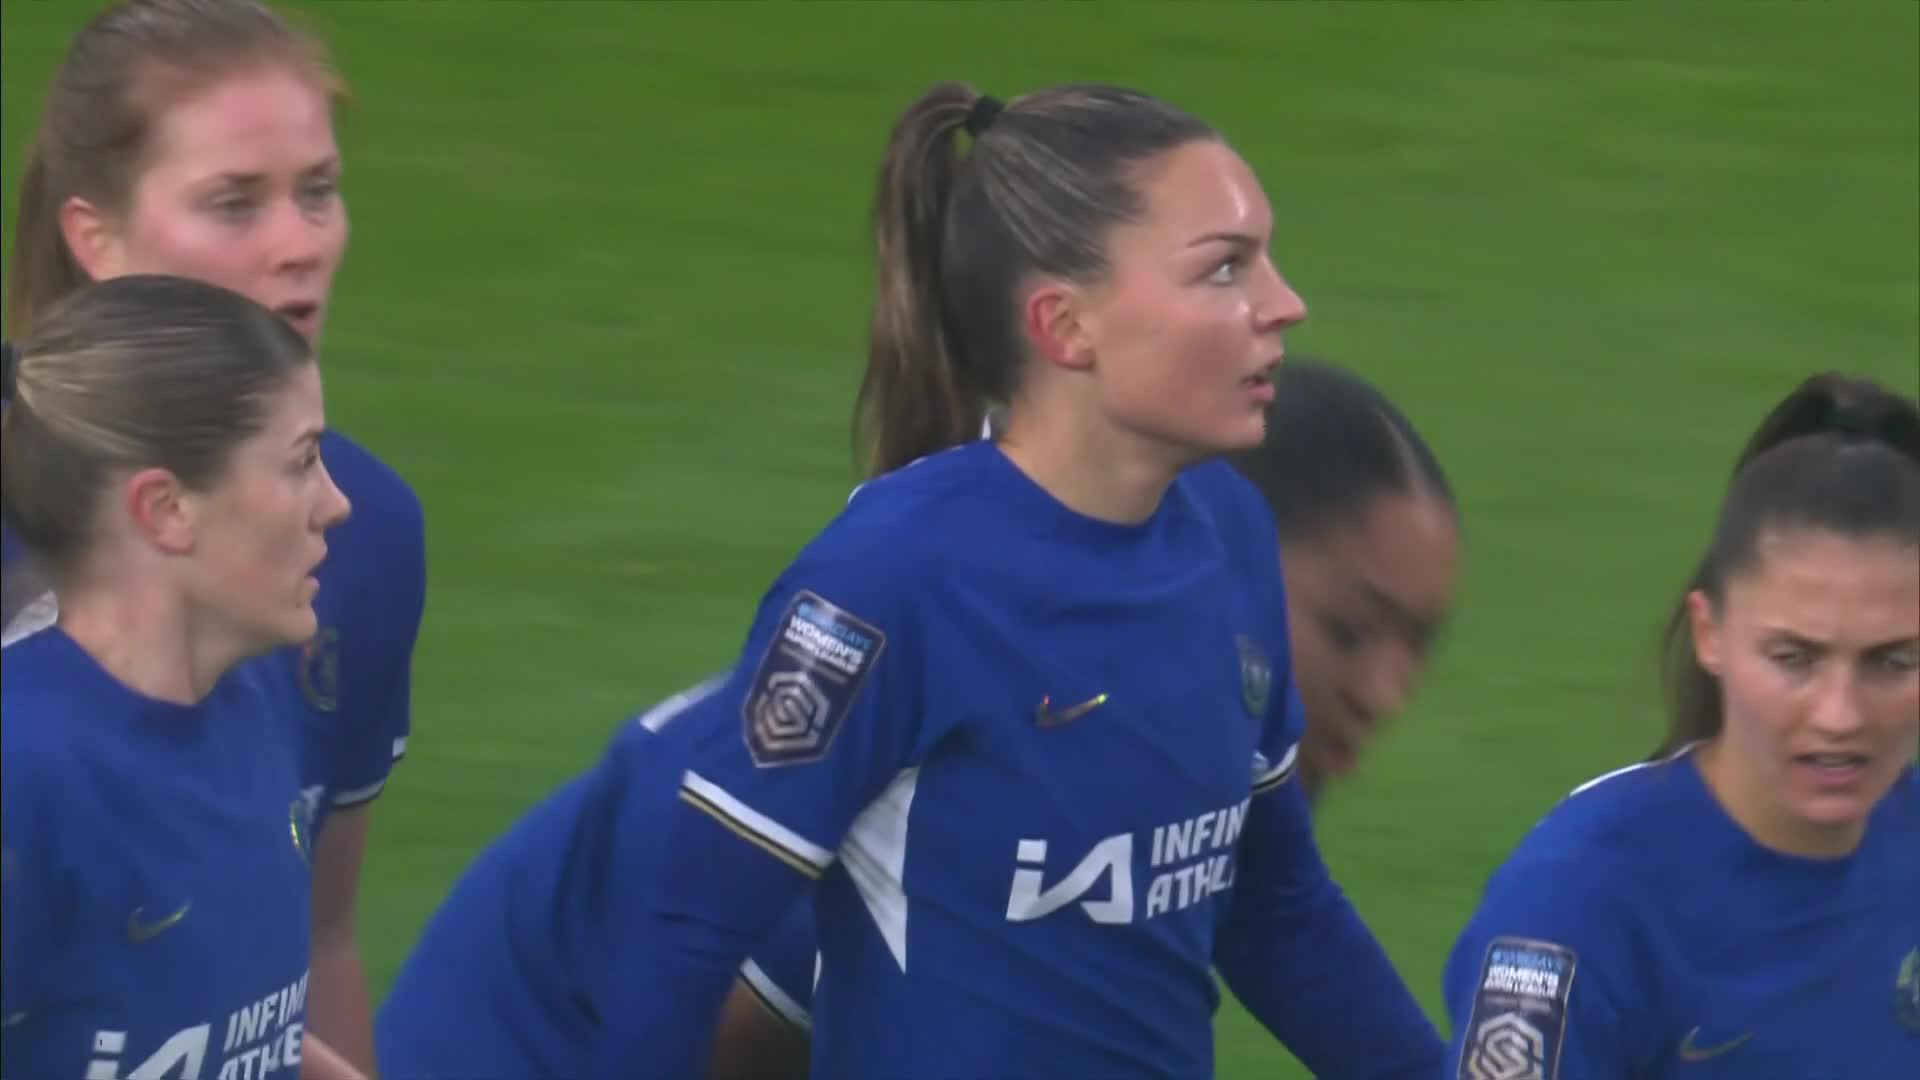 JOHANNA KANERYD WITH THE IMMEDIATE RESPONSE FOR CHELSEA. 😤